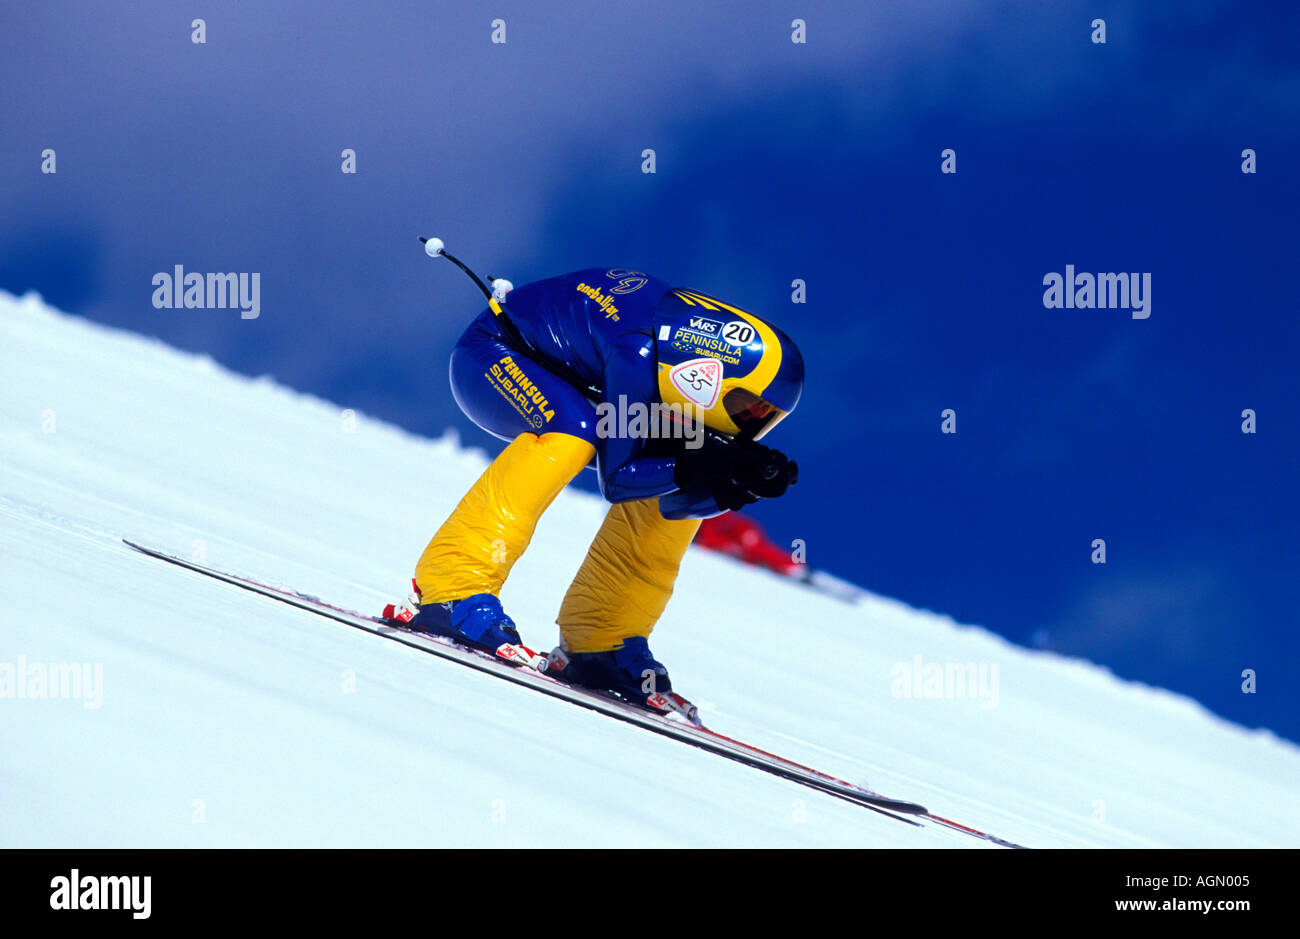 Speed skier racing in Les Arcs France Stock Photo